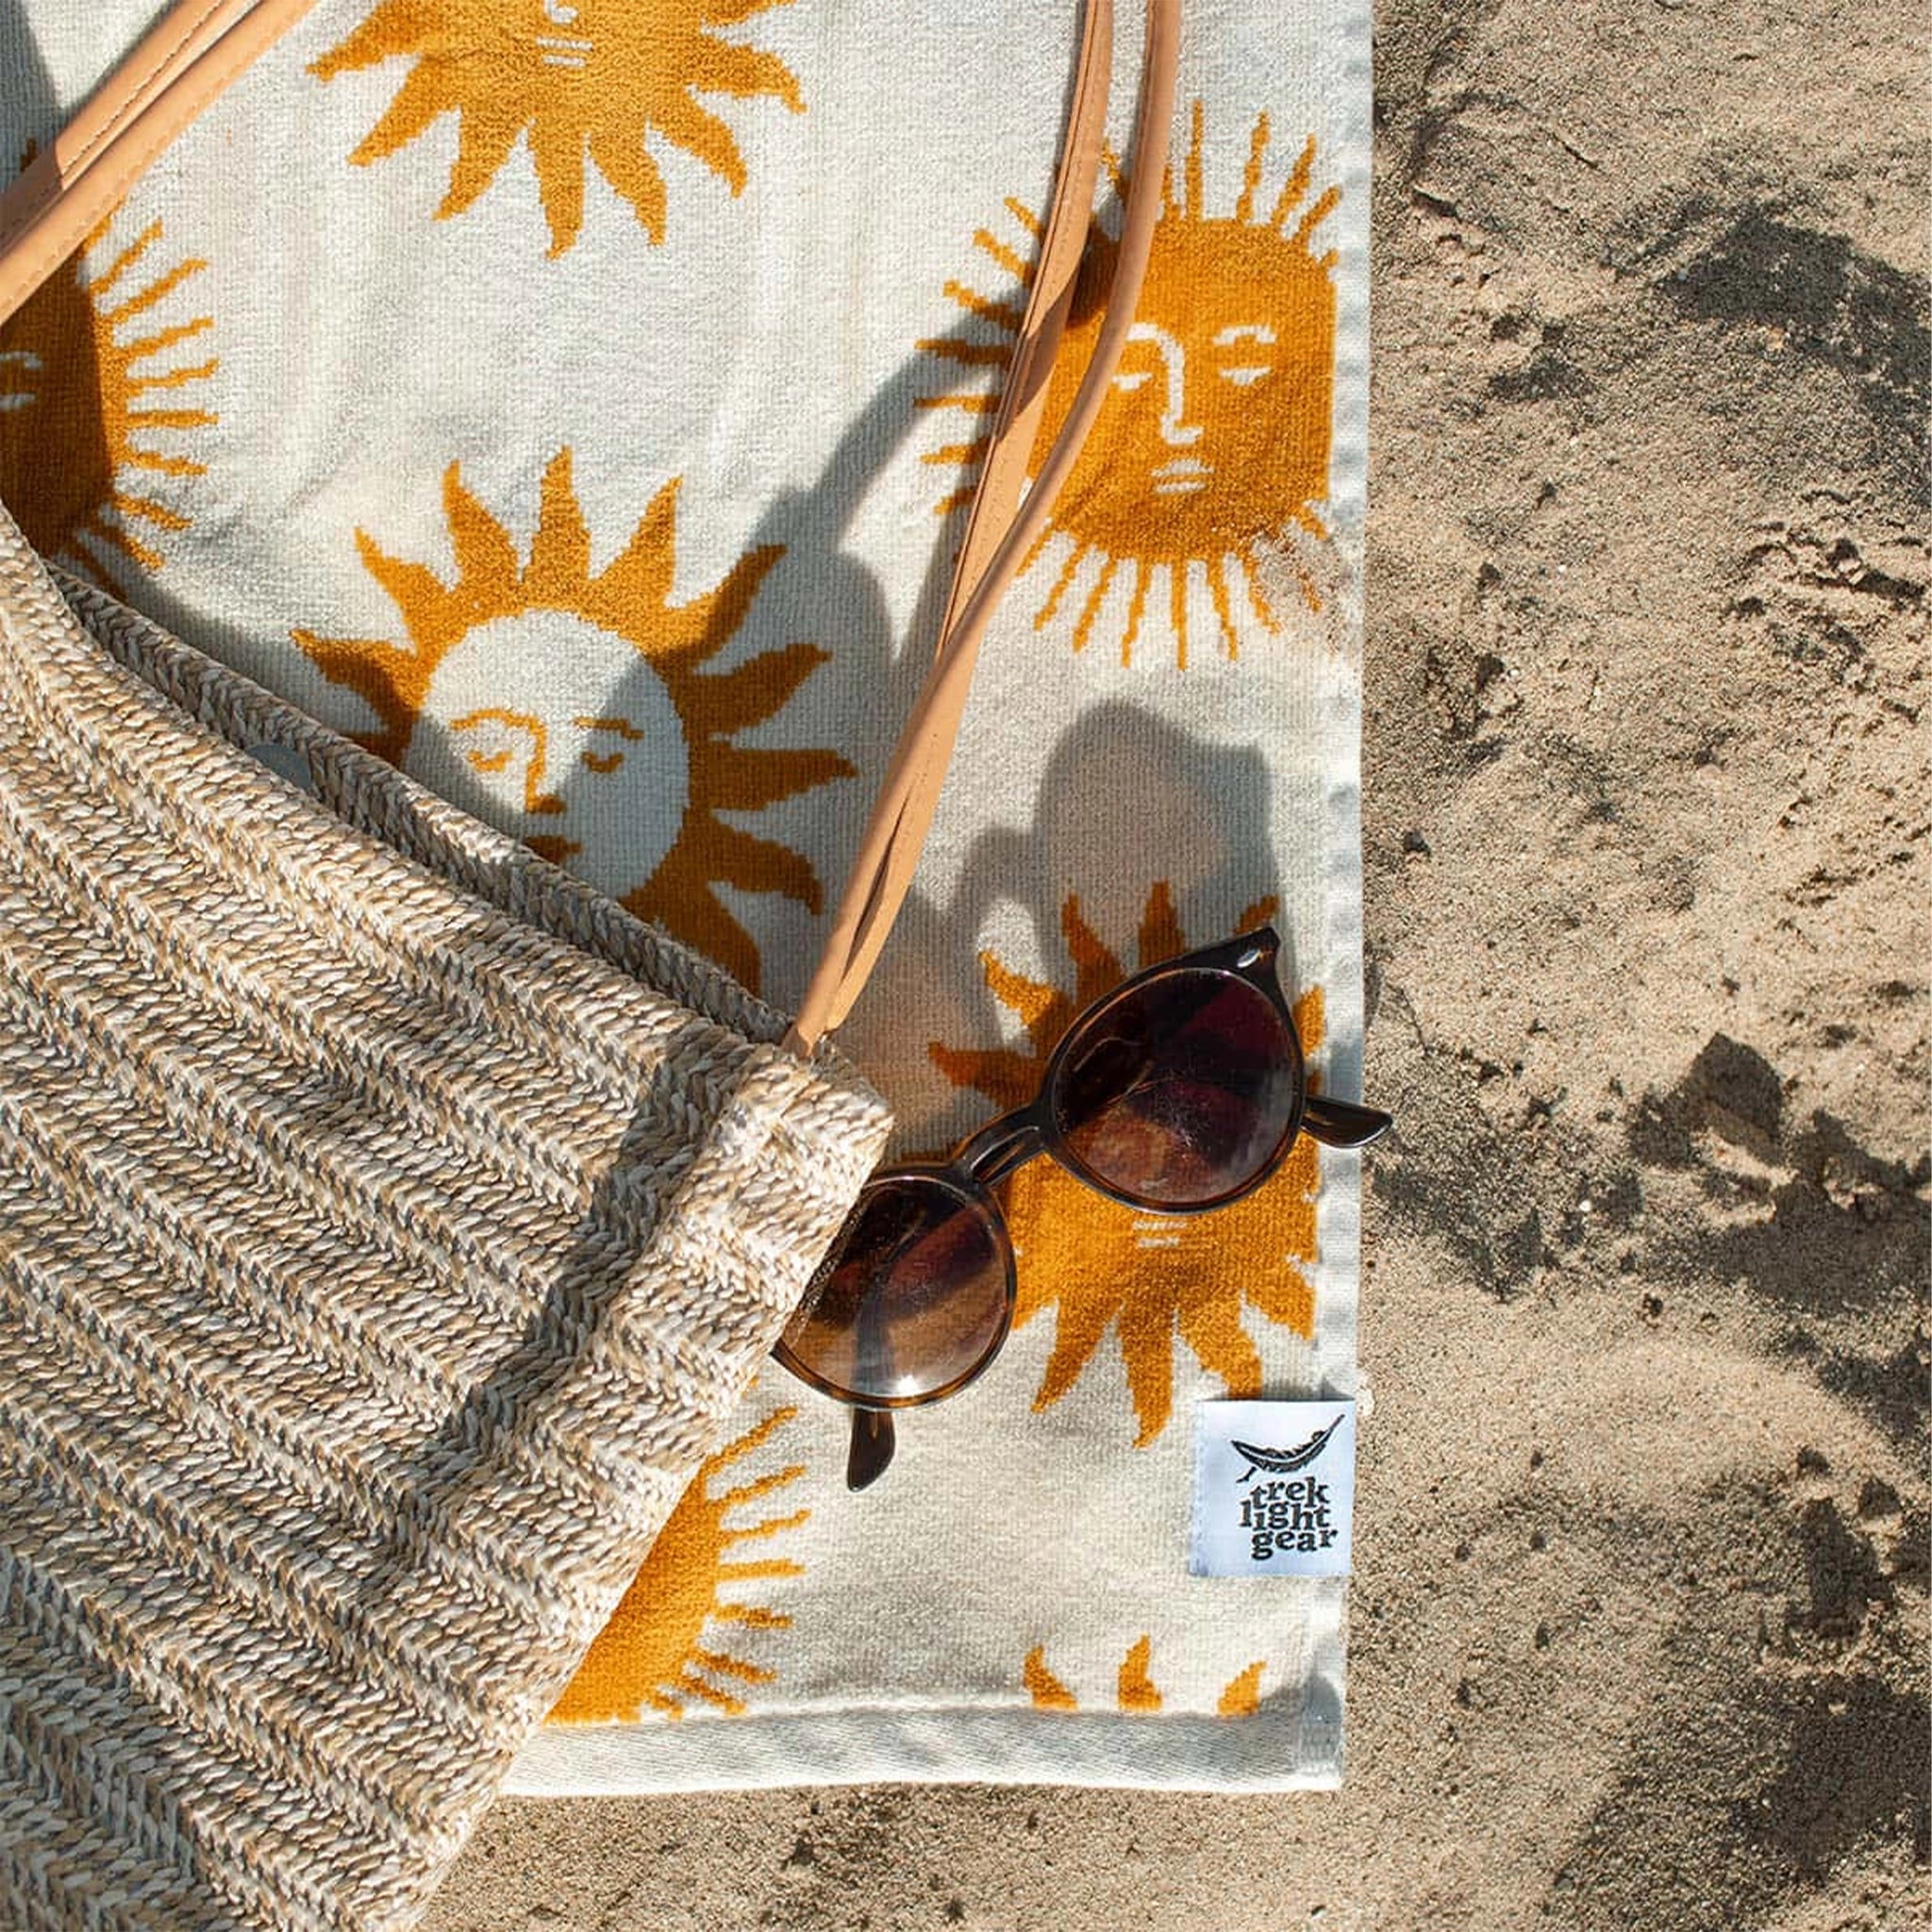 A cream and mustard yellow beach / bath towel with a sun design on the front and back and photographed on a sand beach alongside a pair of sunglasses and a woven straw bag.  